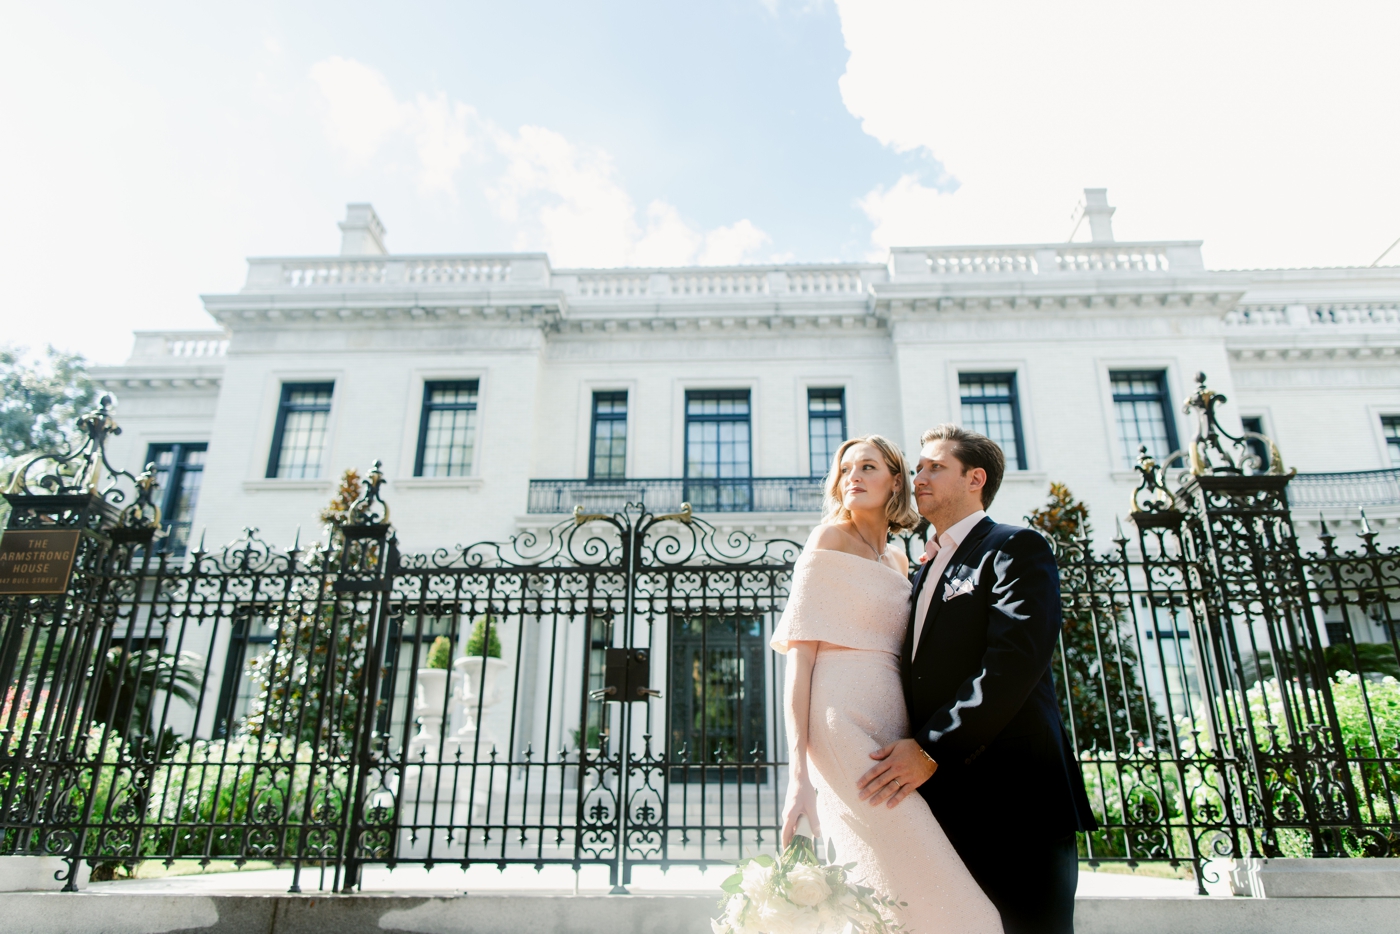 Bride and groom portraits after an elopement in Historic Savannah